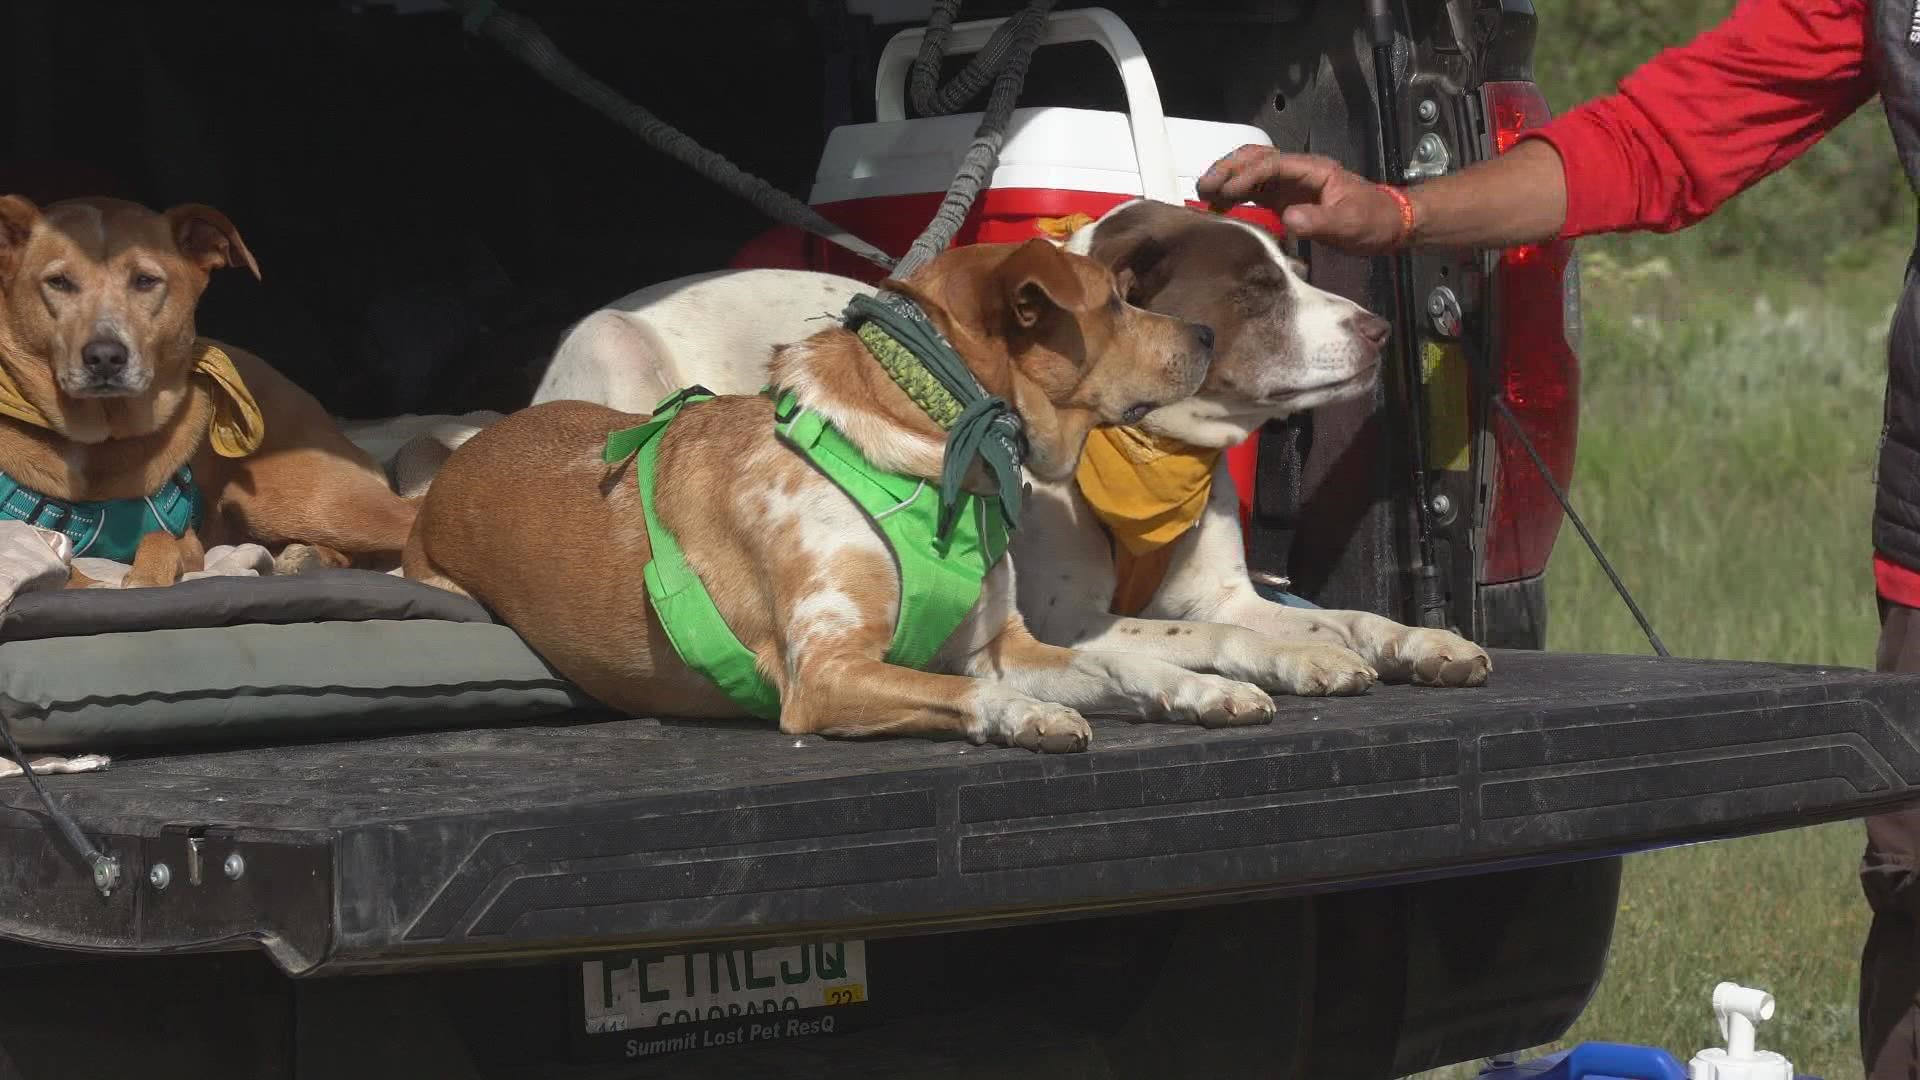 After rescuing an older dog that couldn’t handle hiking a 14er, Summit County Rescue has tips for people and pets when hiking on Colorado trails.